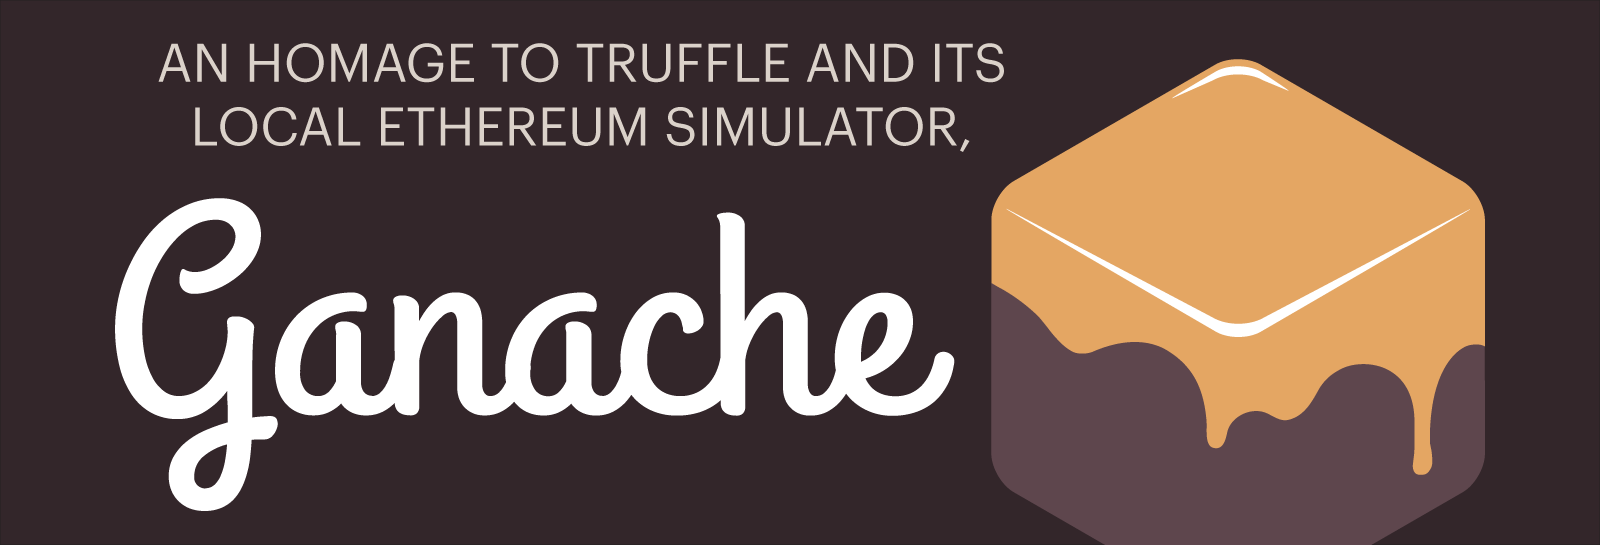 Homage to Truffle and its local Ethereum simulator